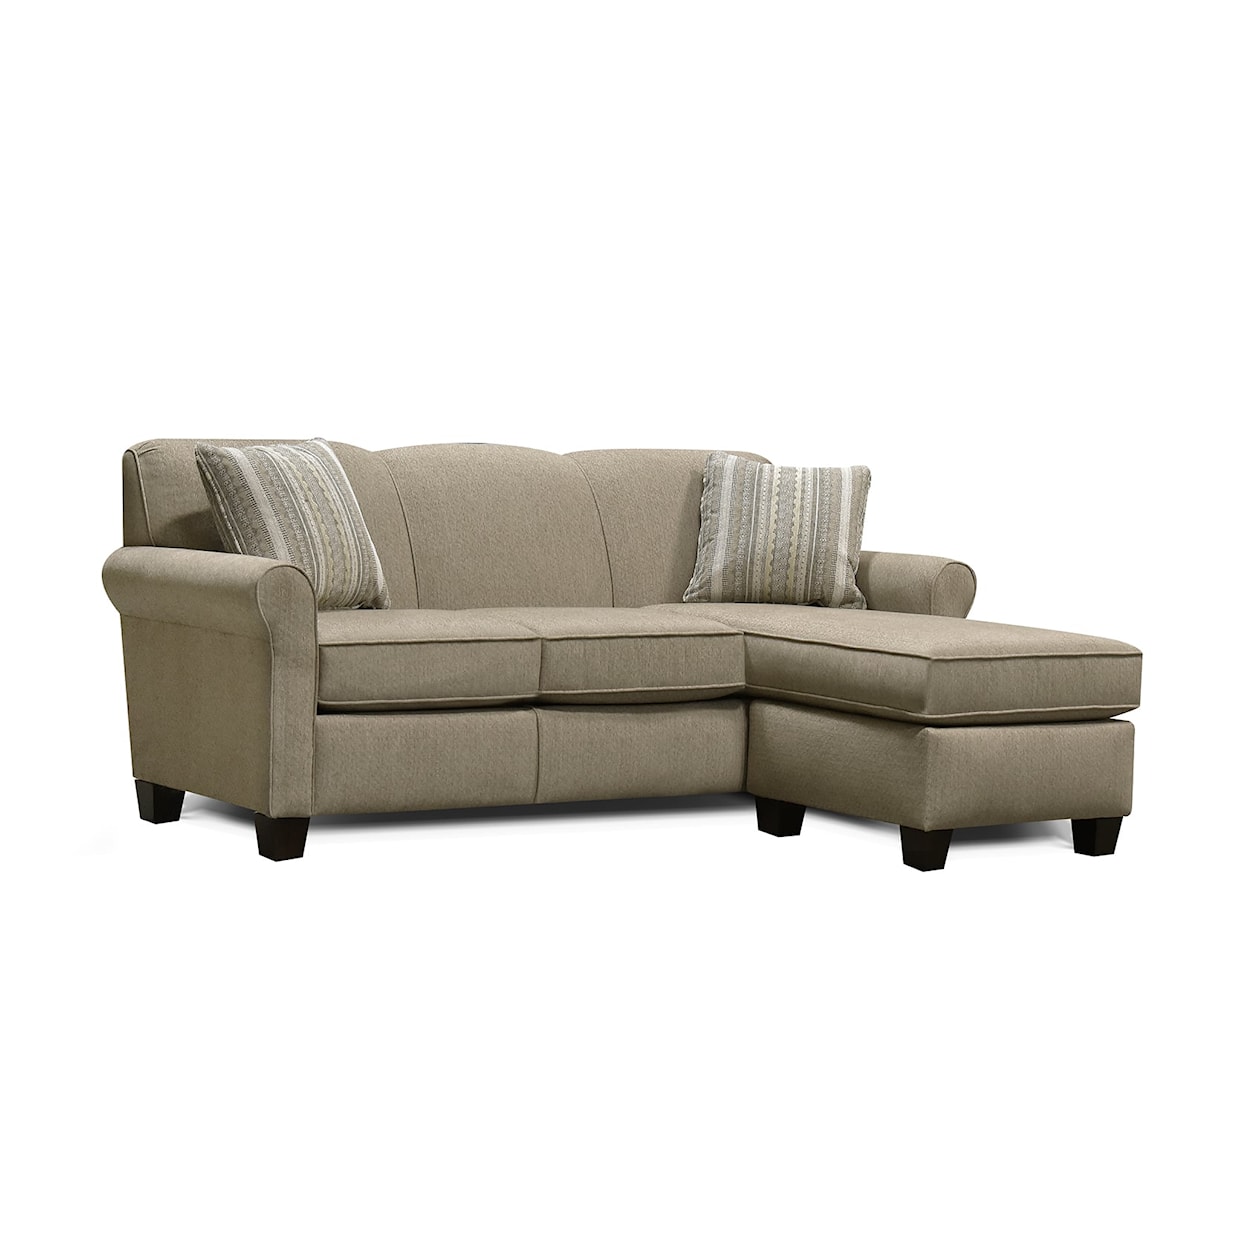 England Angie Sectional Sofa with Floating Ottoman Chaise